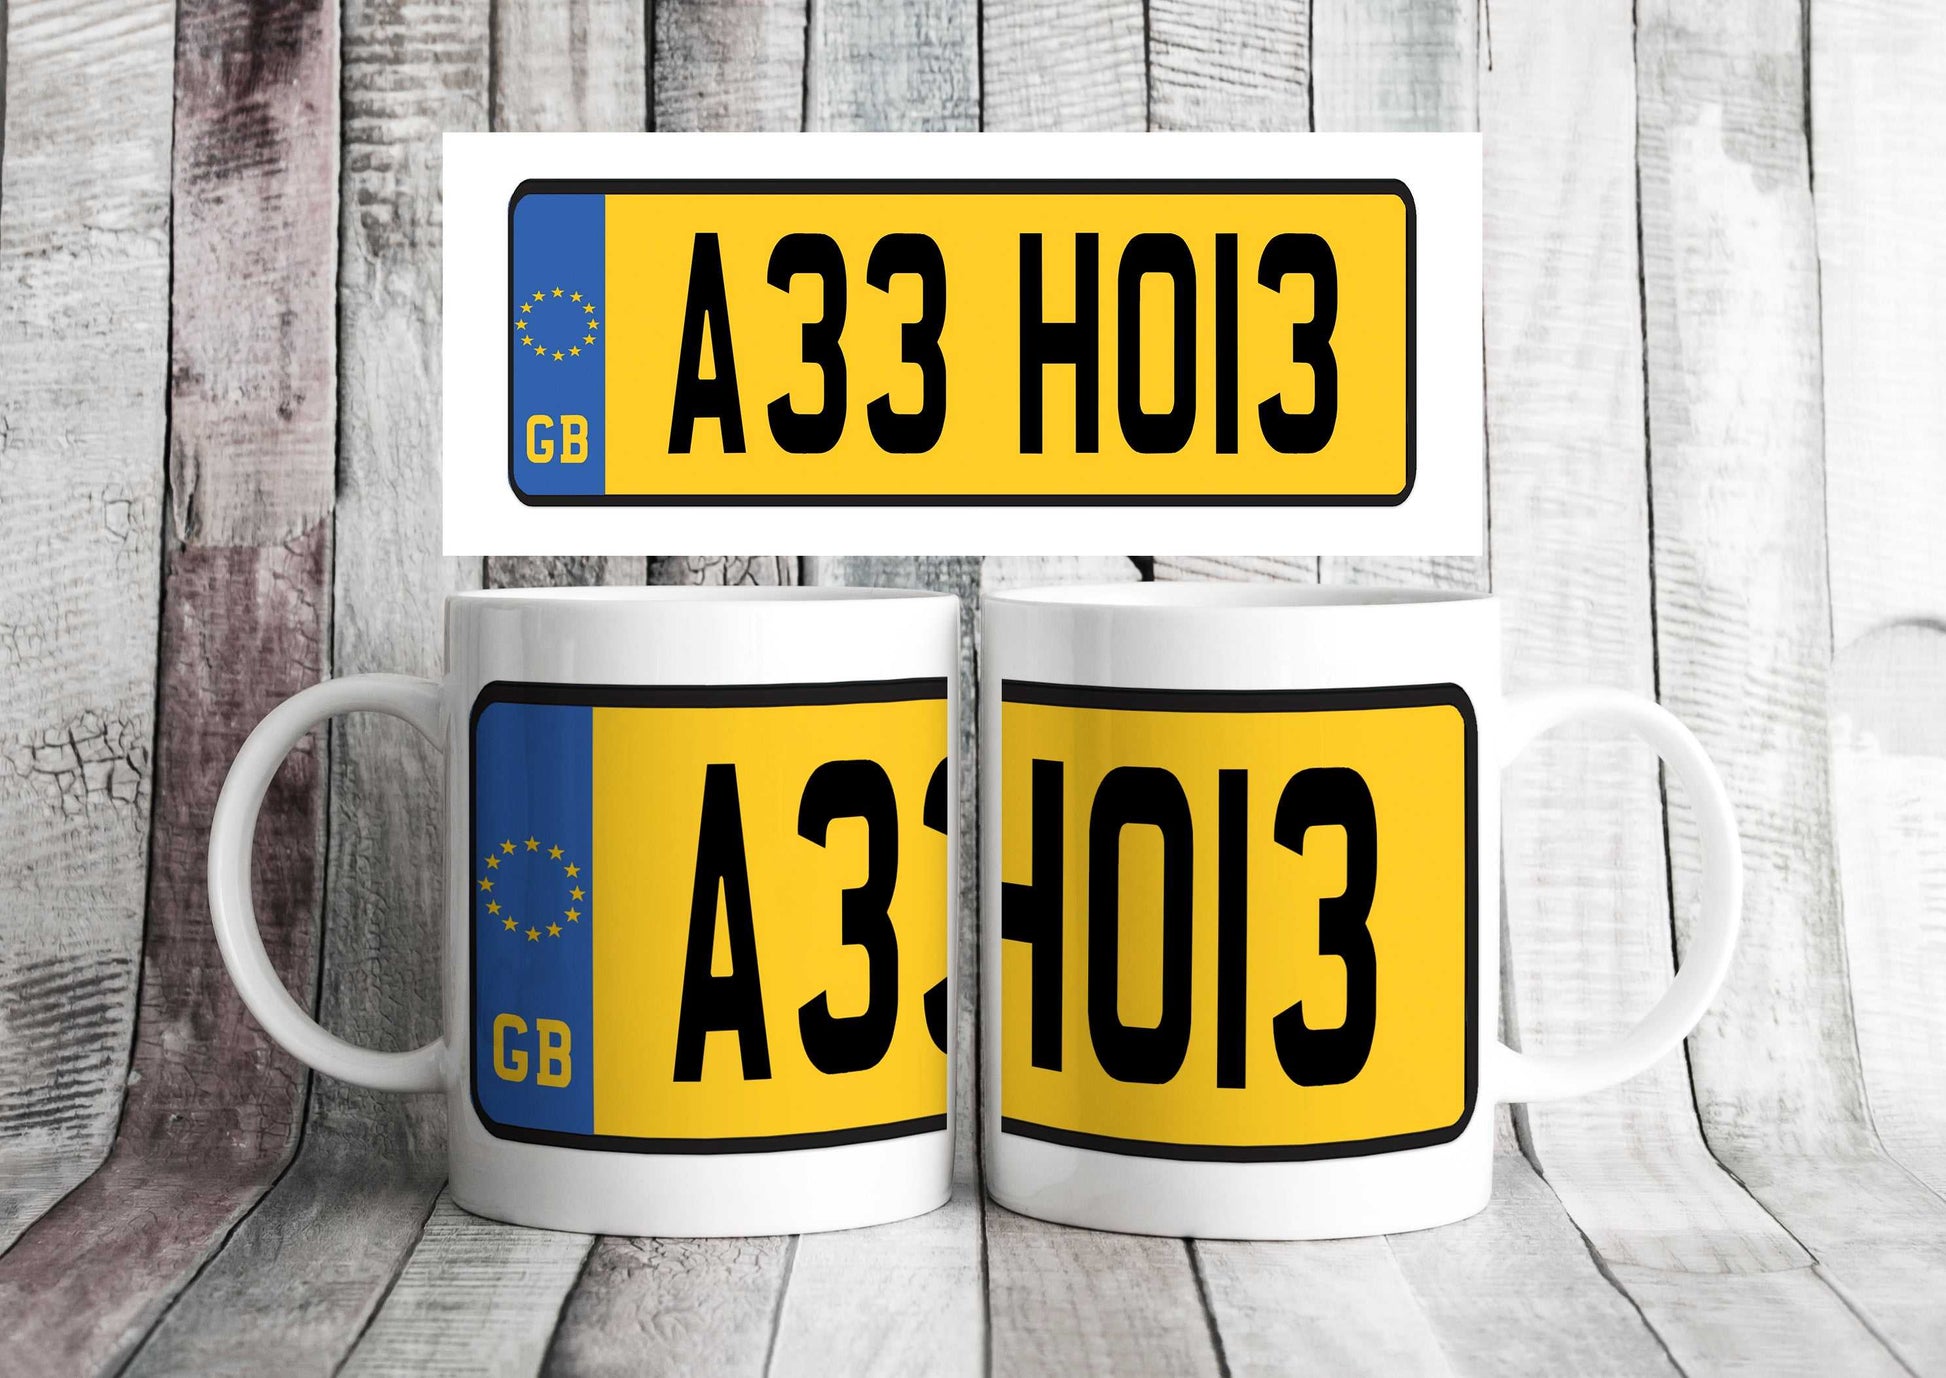  Insult Number Plate Coffee Mug in Various Designs by Free Spirit Accessories sold by Free Spirit Accessories